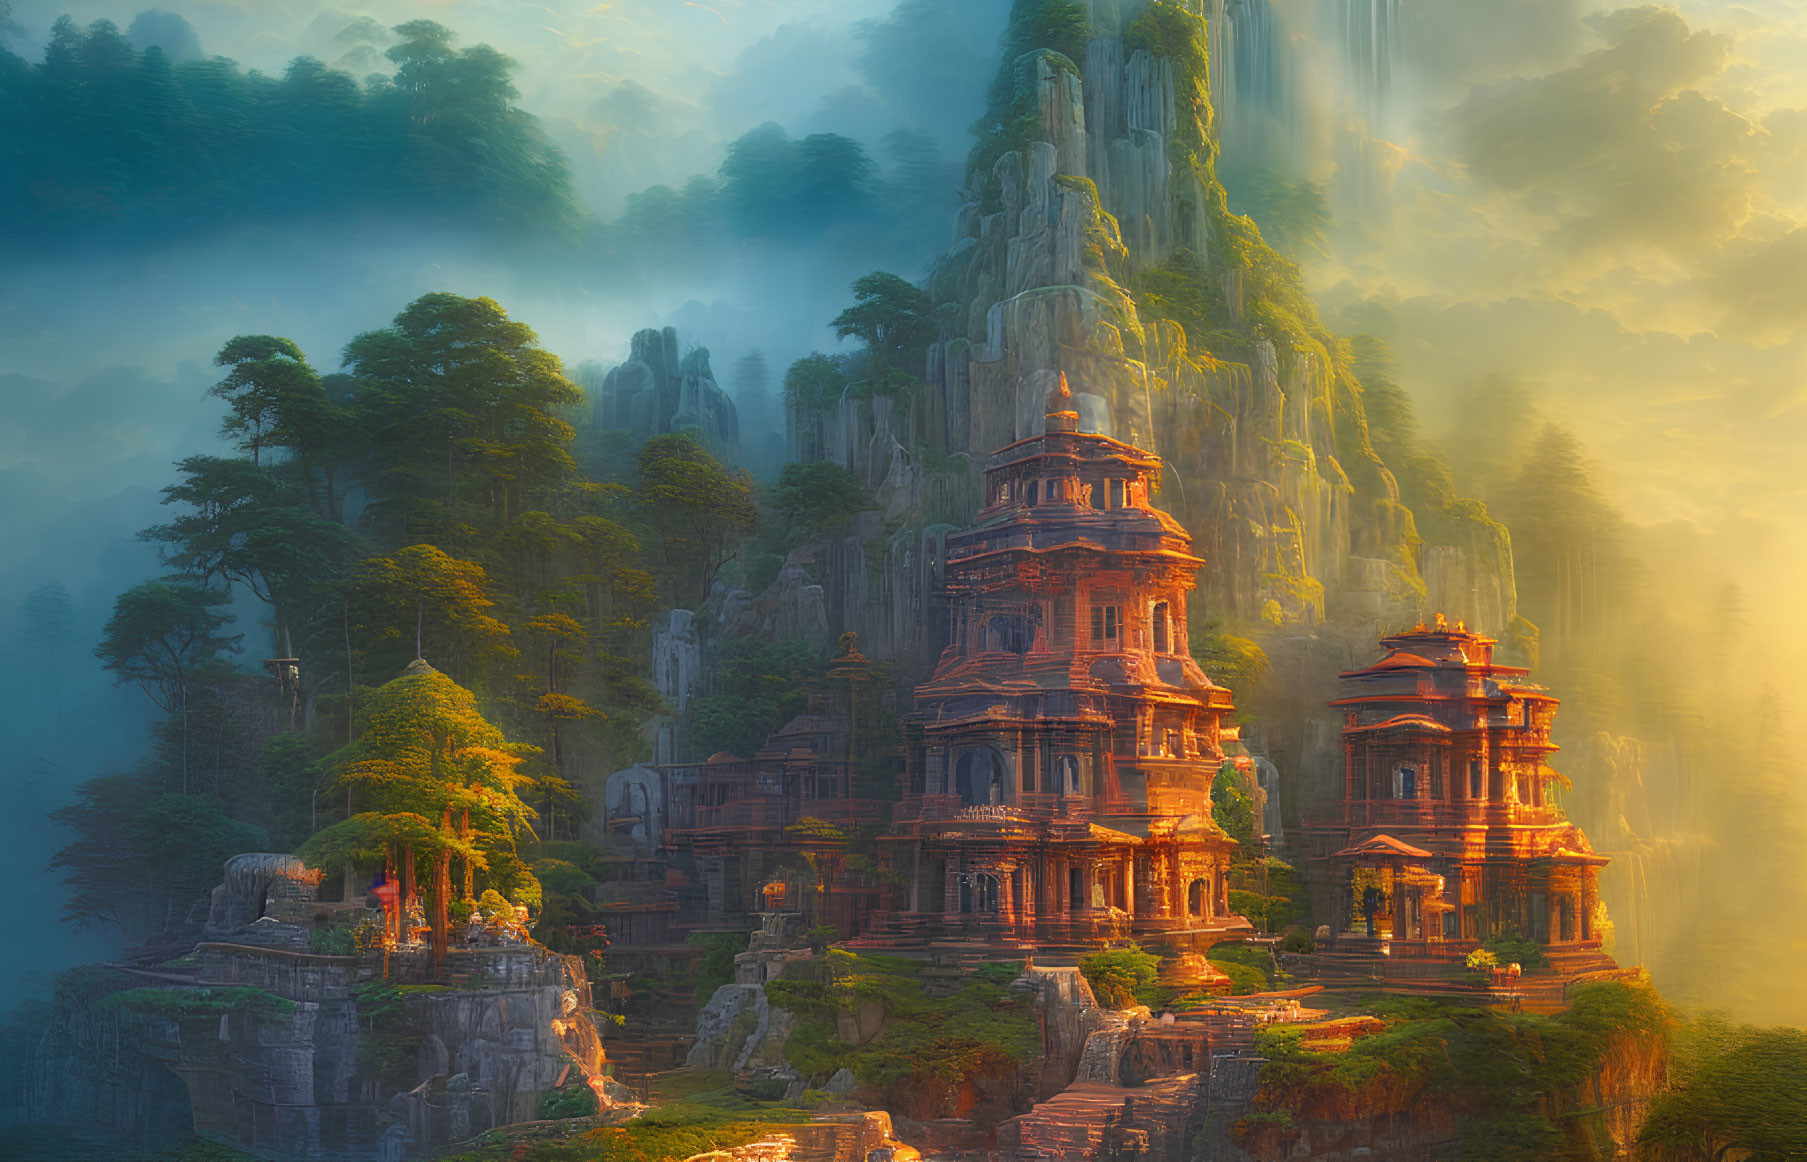 Ancient temples on cliff sides in misty mountain landscape